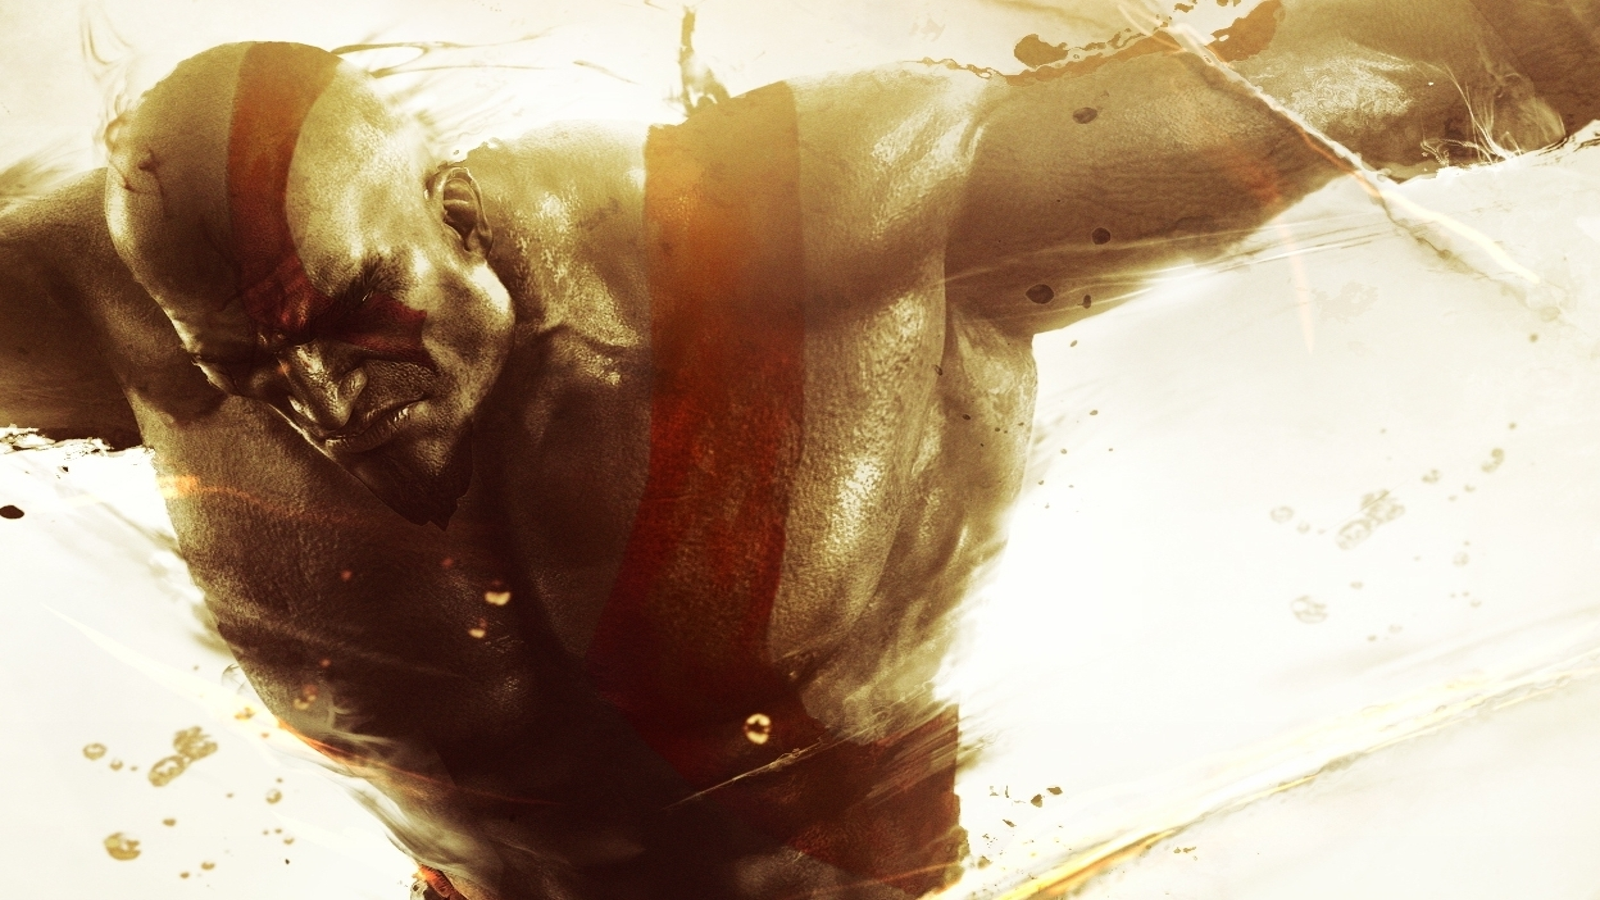 Review: 'God of War: Ascension' fun but flawed epic